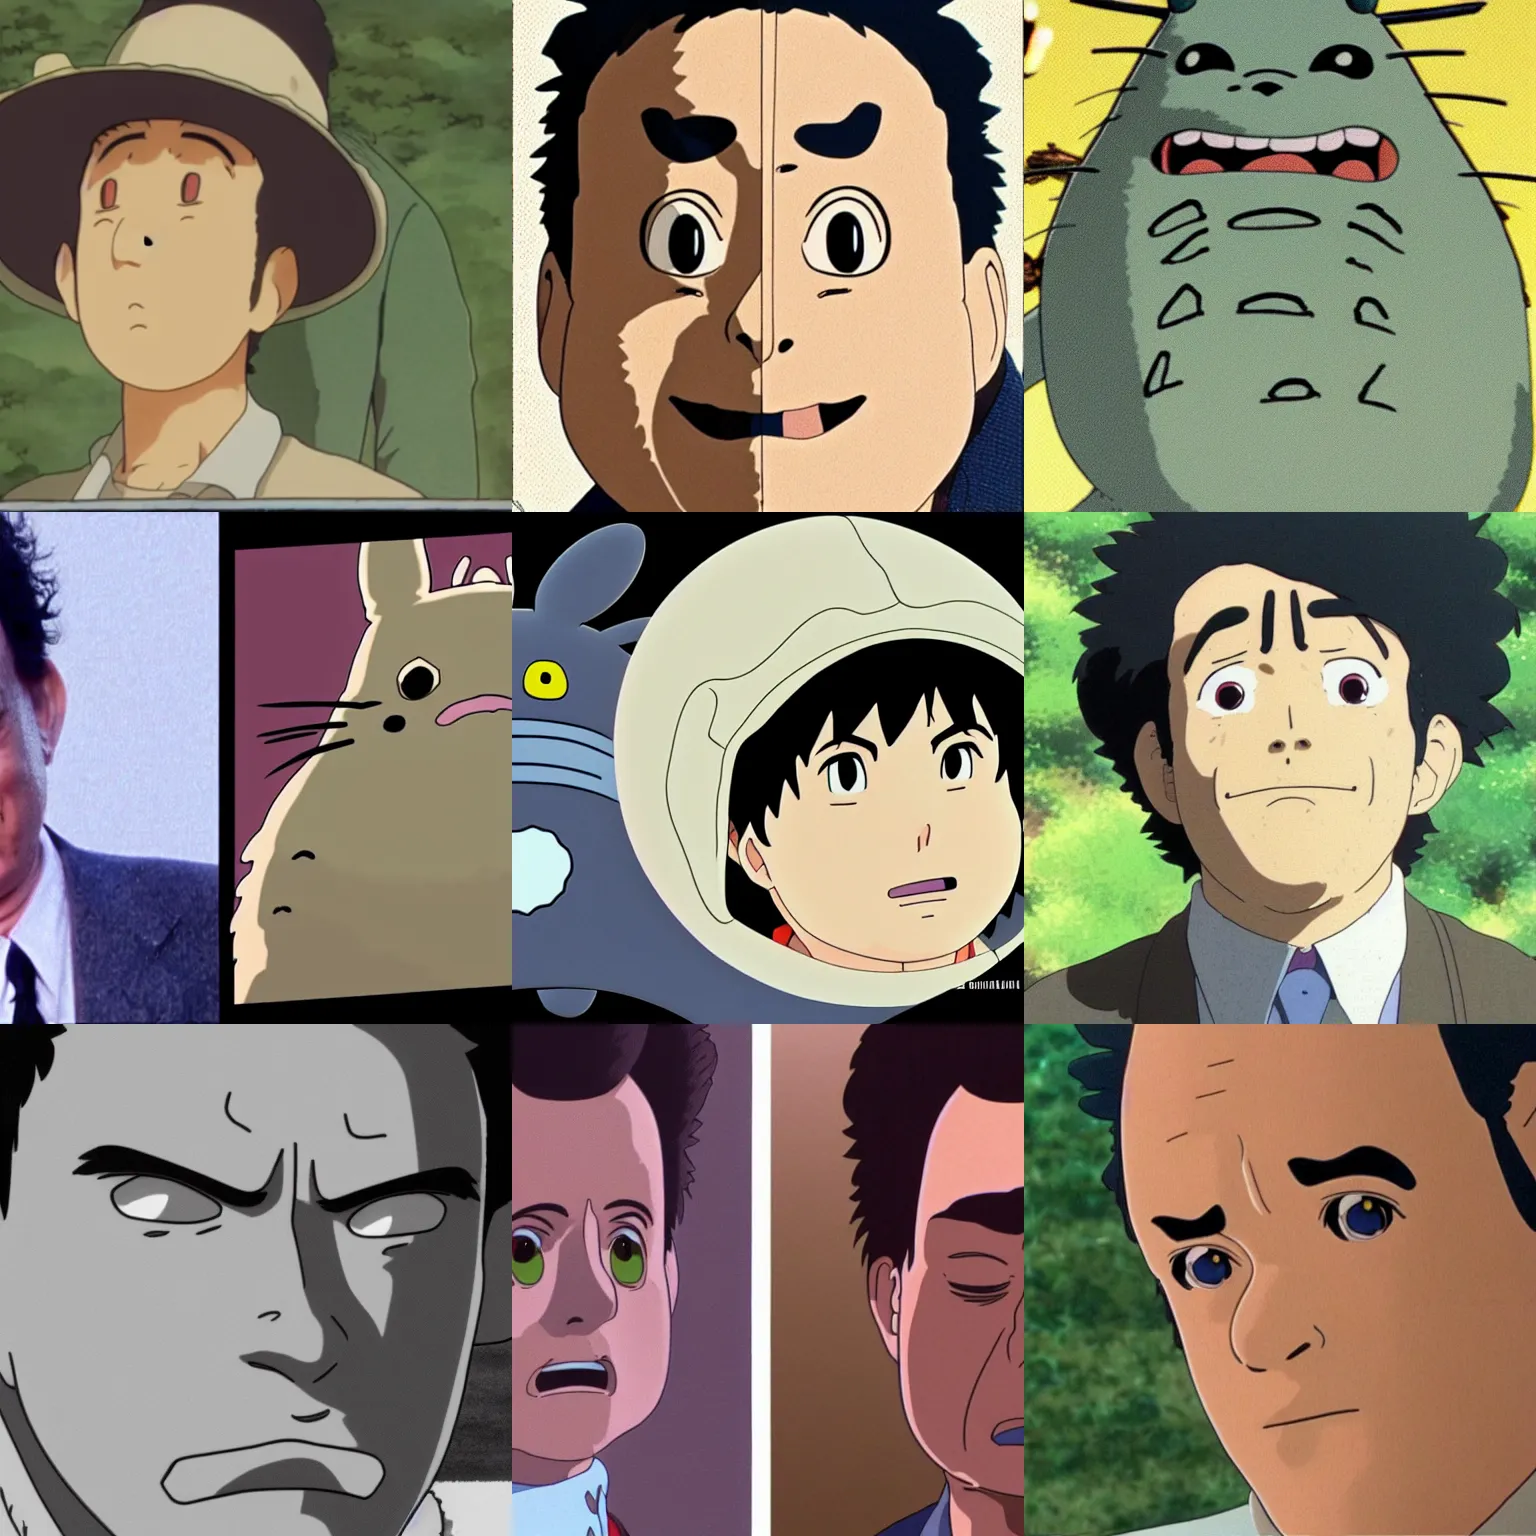 Prompt: tom hanks anime human character in totoro, close up face , by ghibli studio